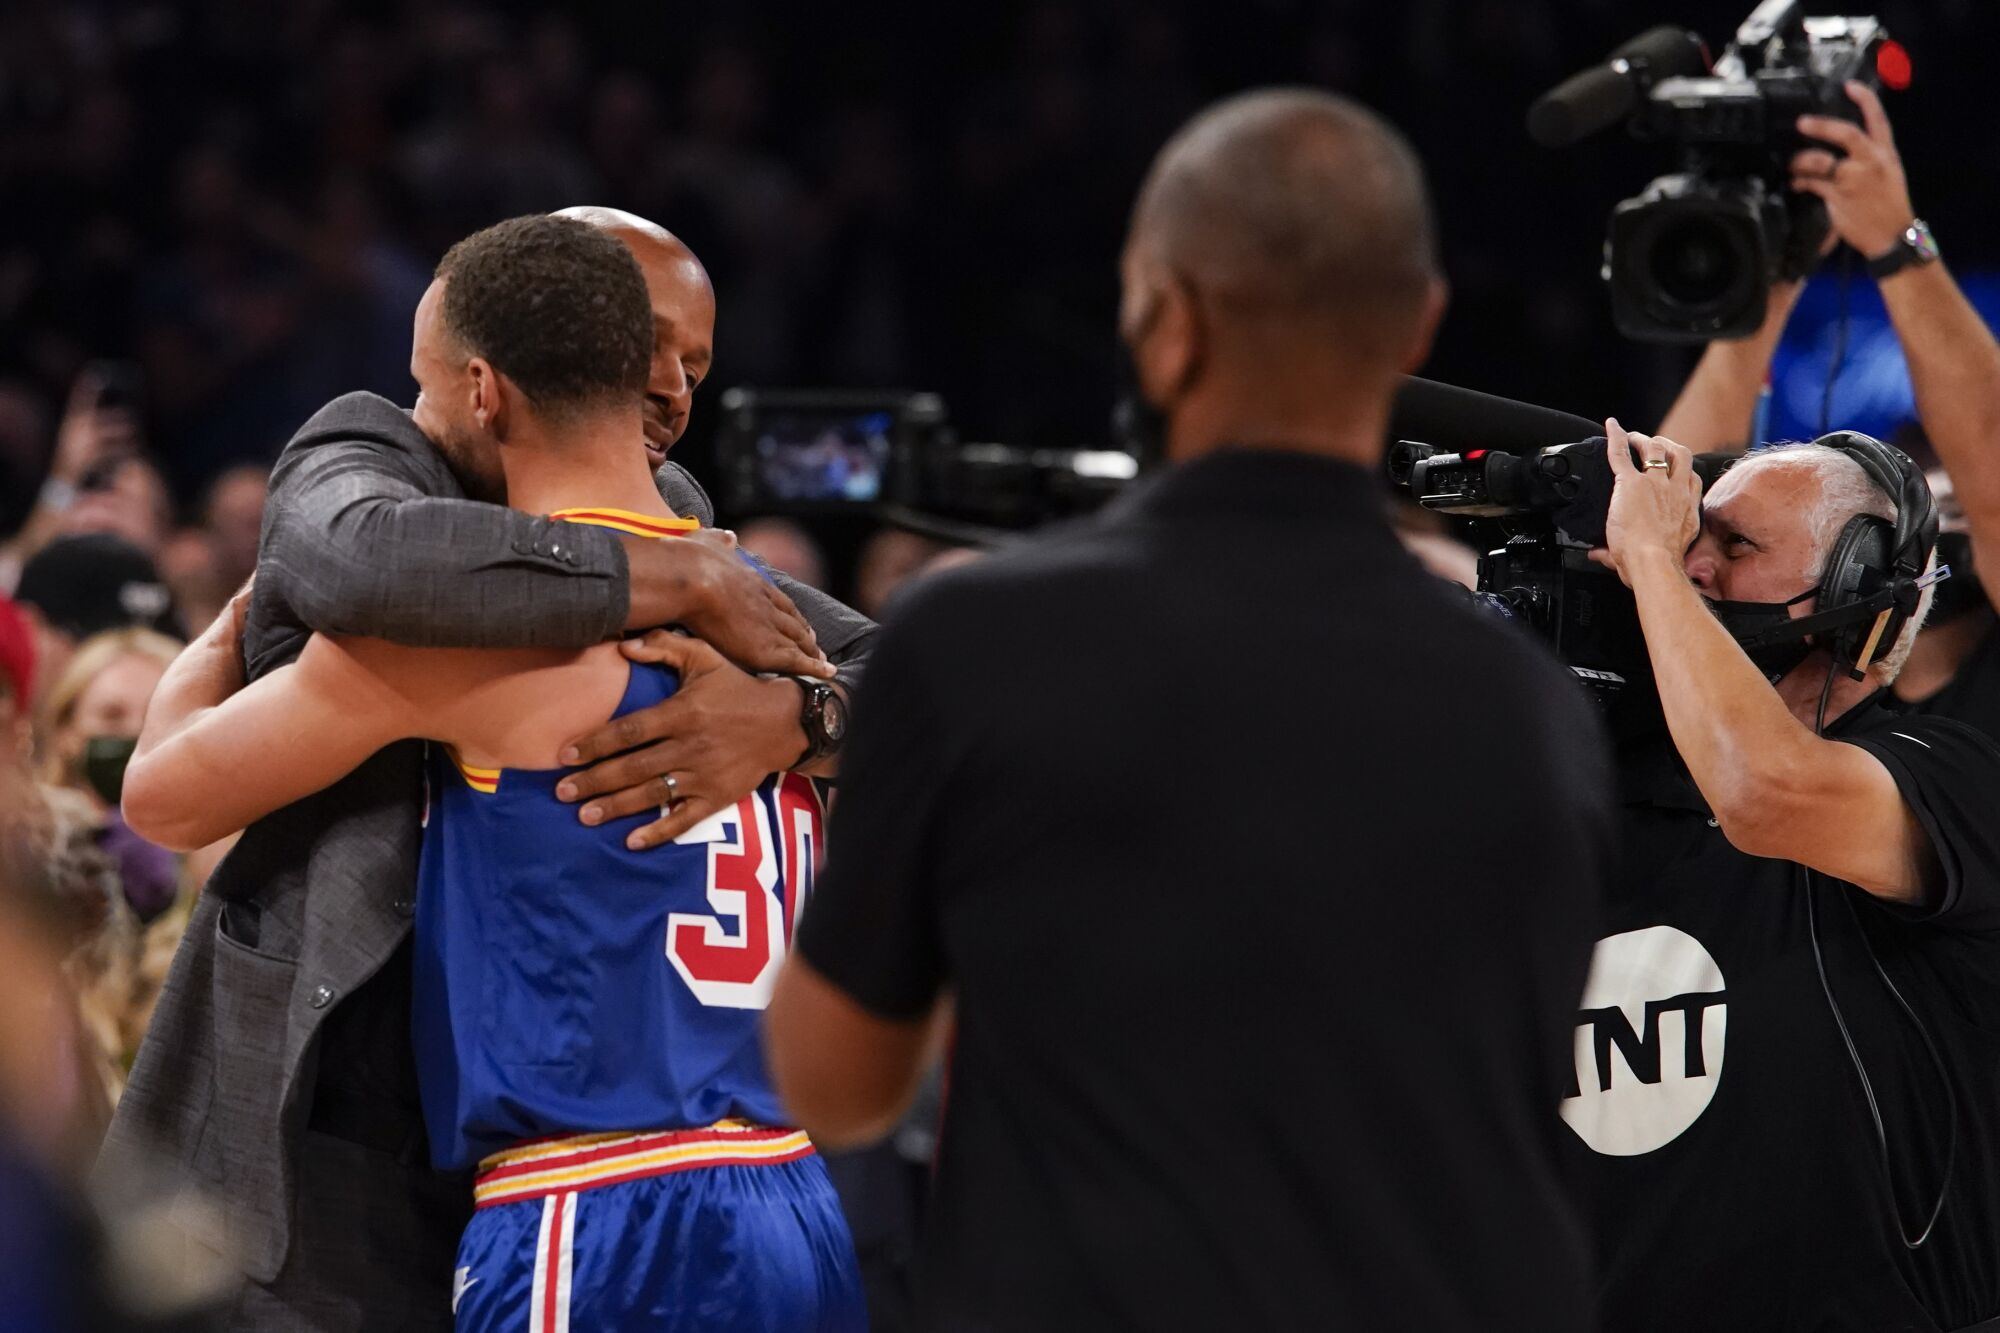 Golden State Warriors guard Stephen Curry hugs former NBA player Ray Allen after Curry broke Allen's record